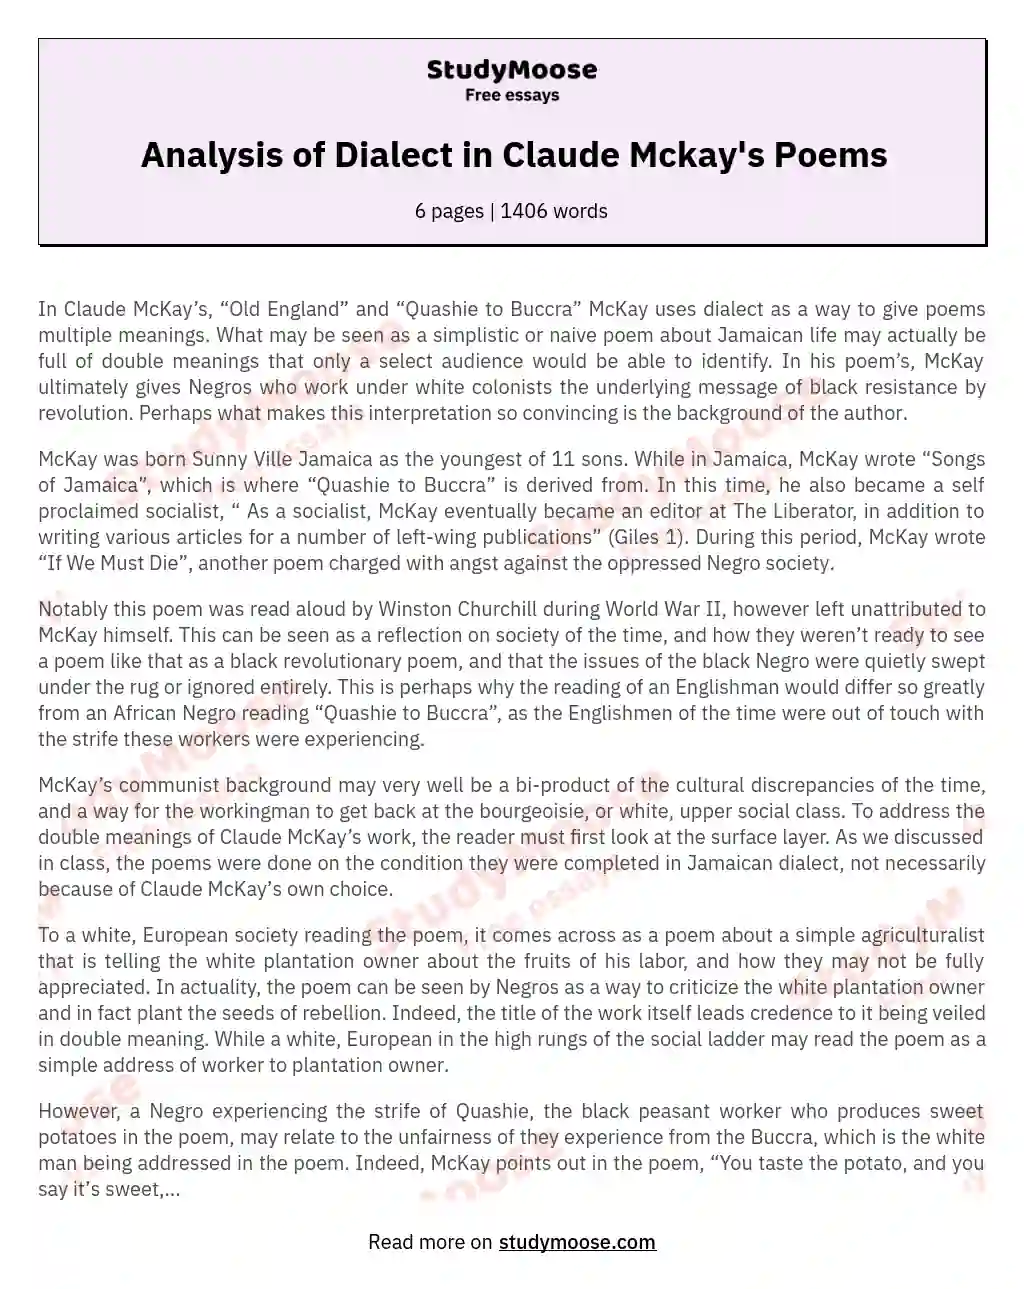 Analysis of Dialect in Claude Mckay's Poems essay